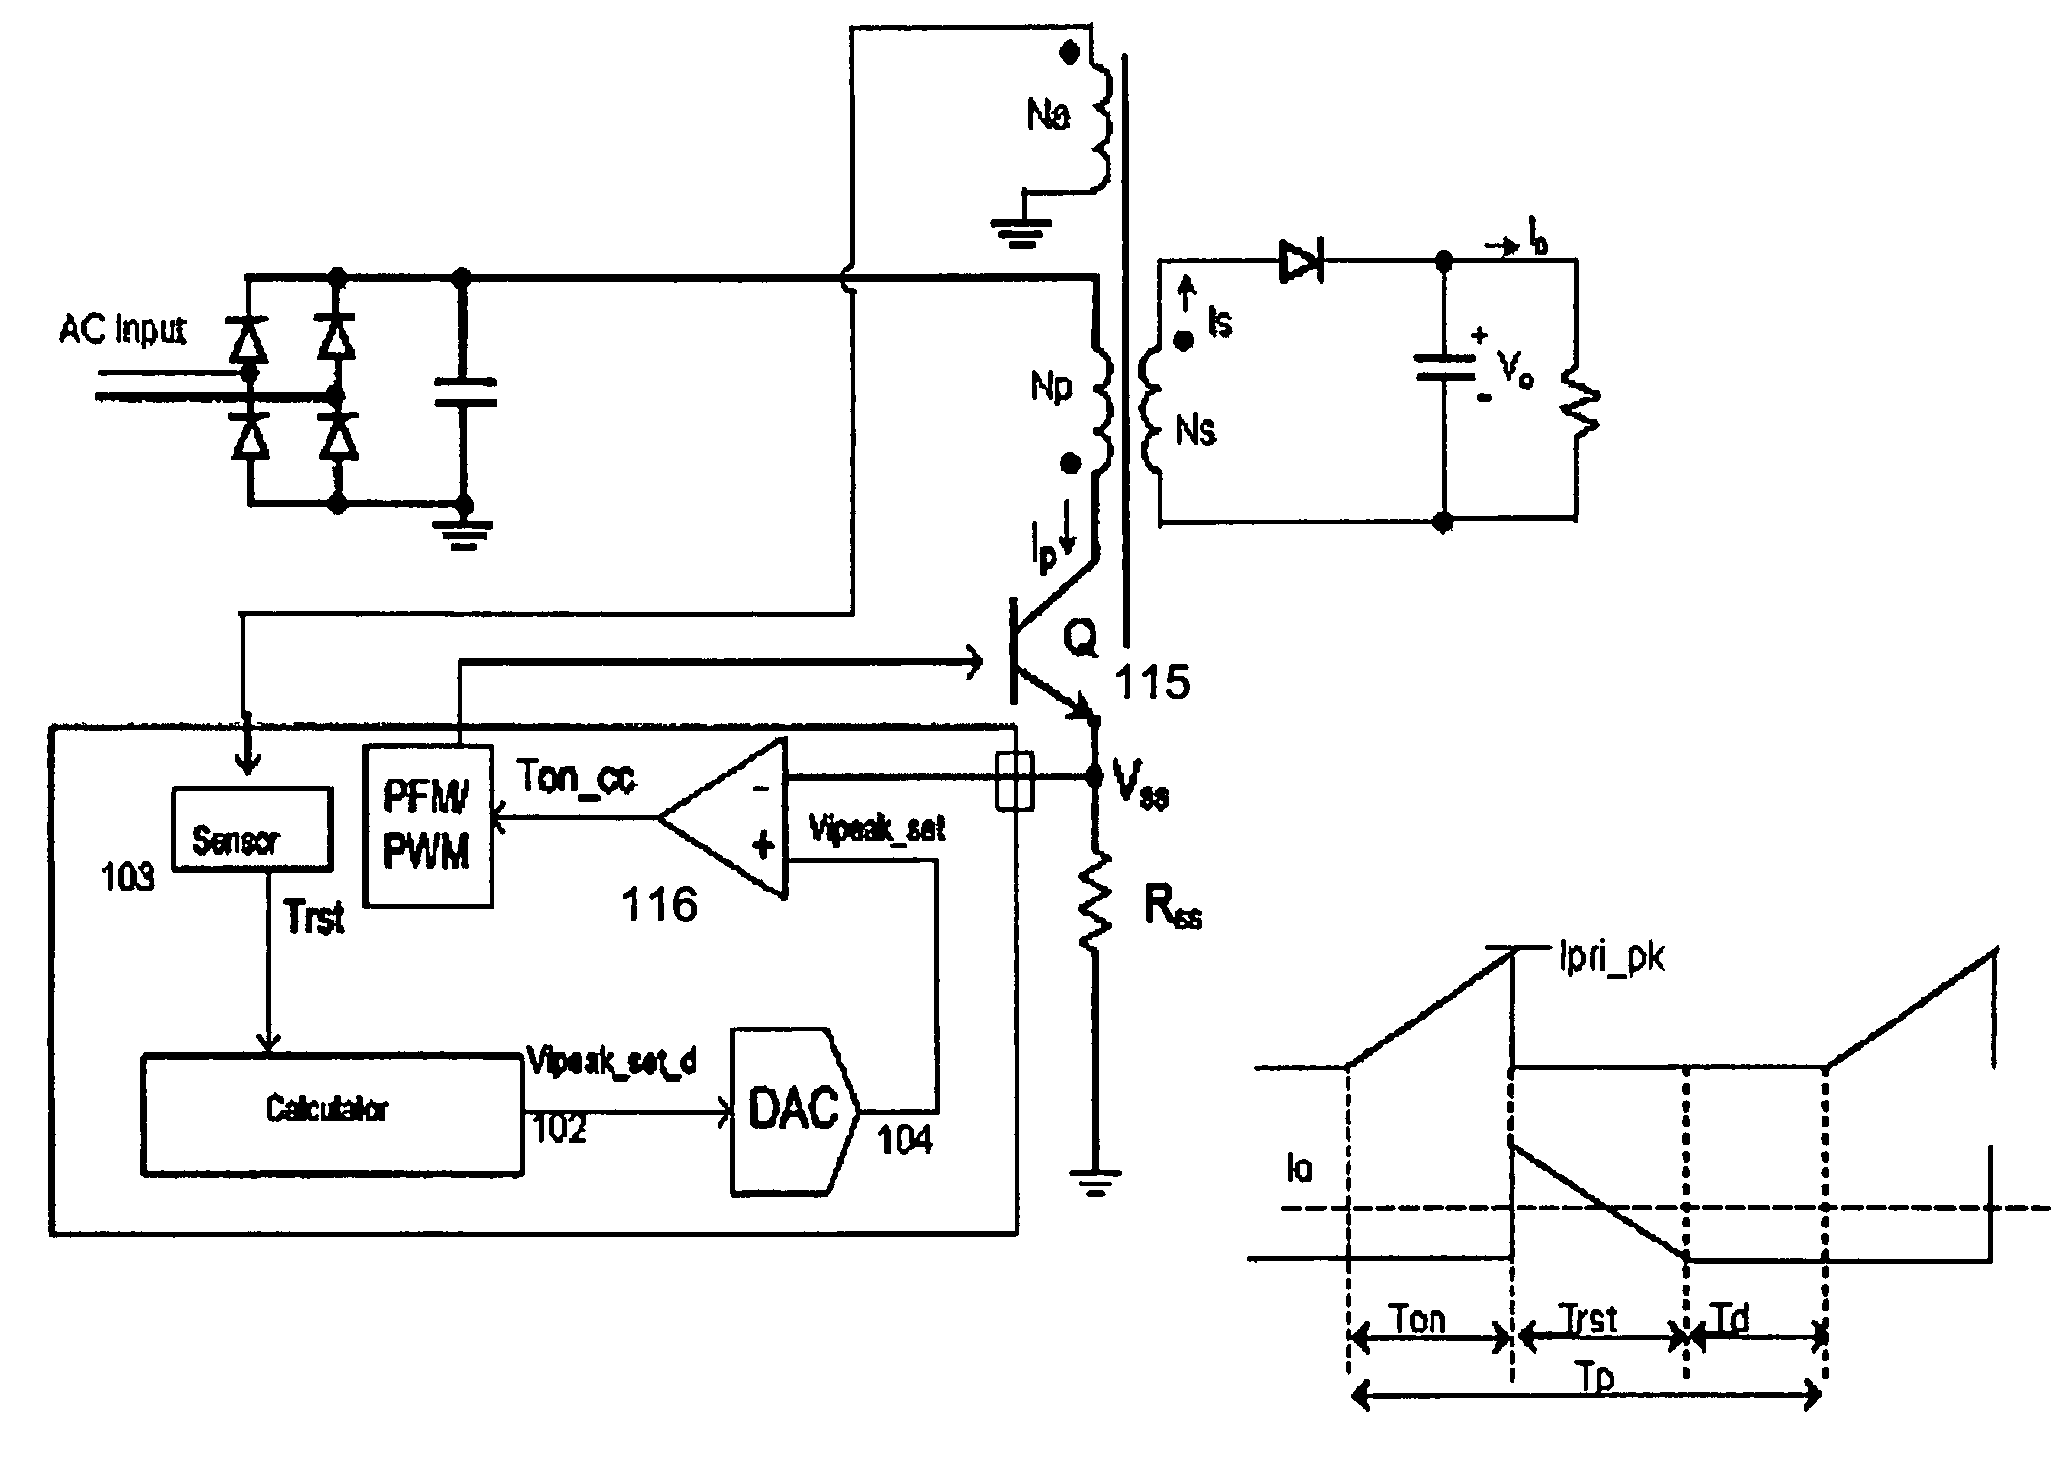 System and method for controlling a current limit with primary side sensing using a hybrid PWM and PFM control